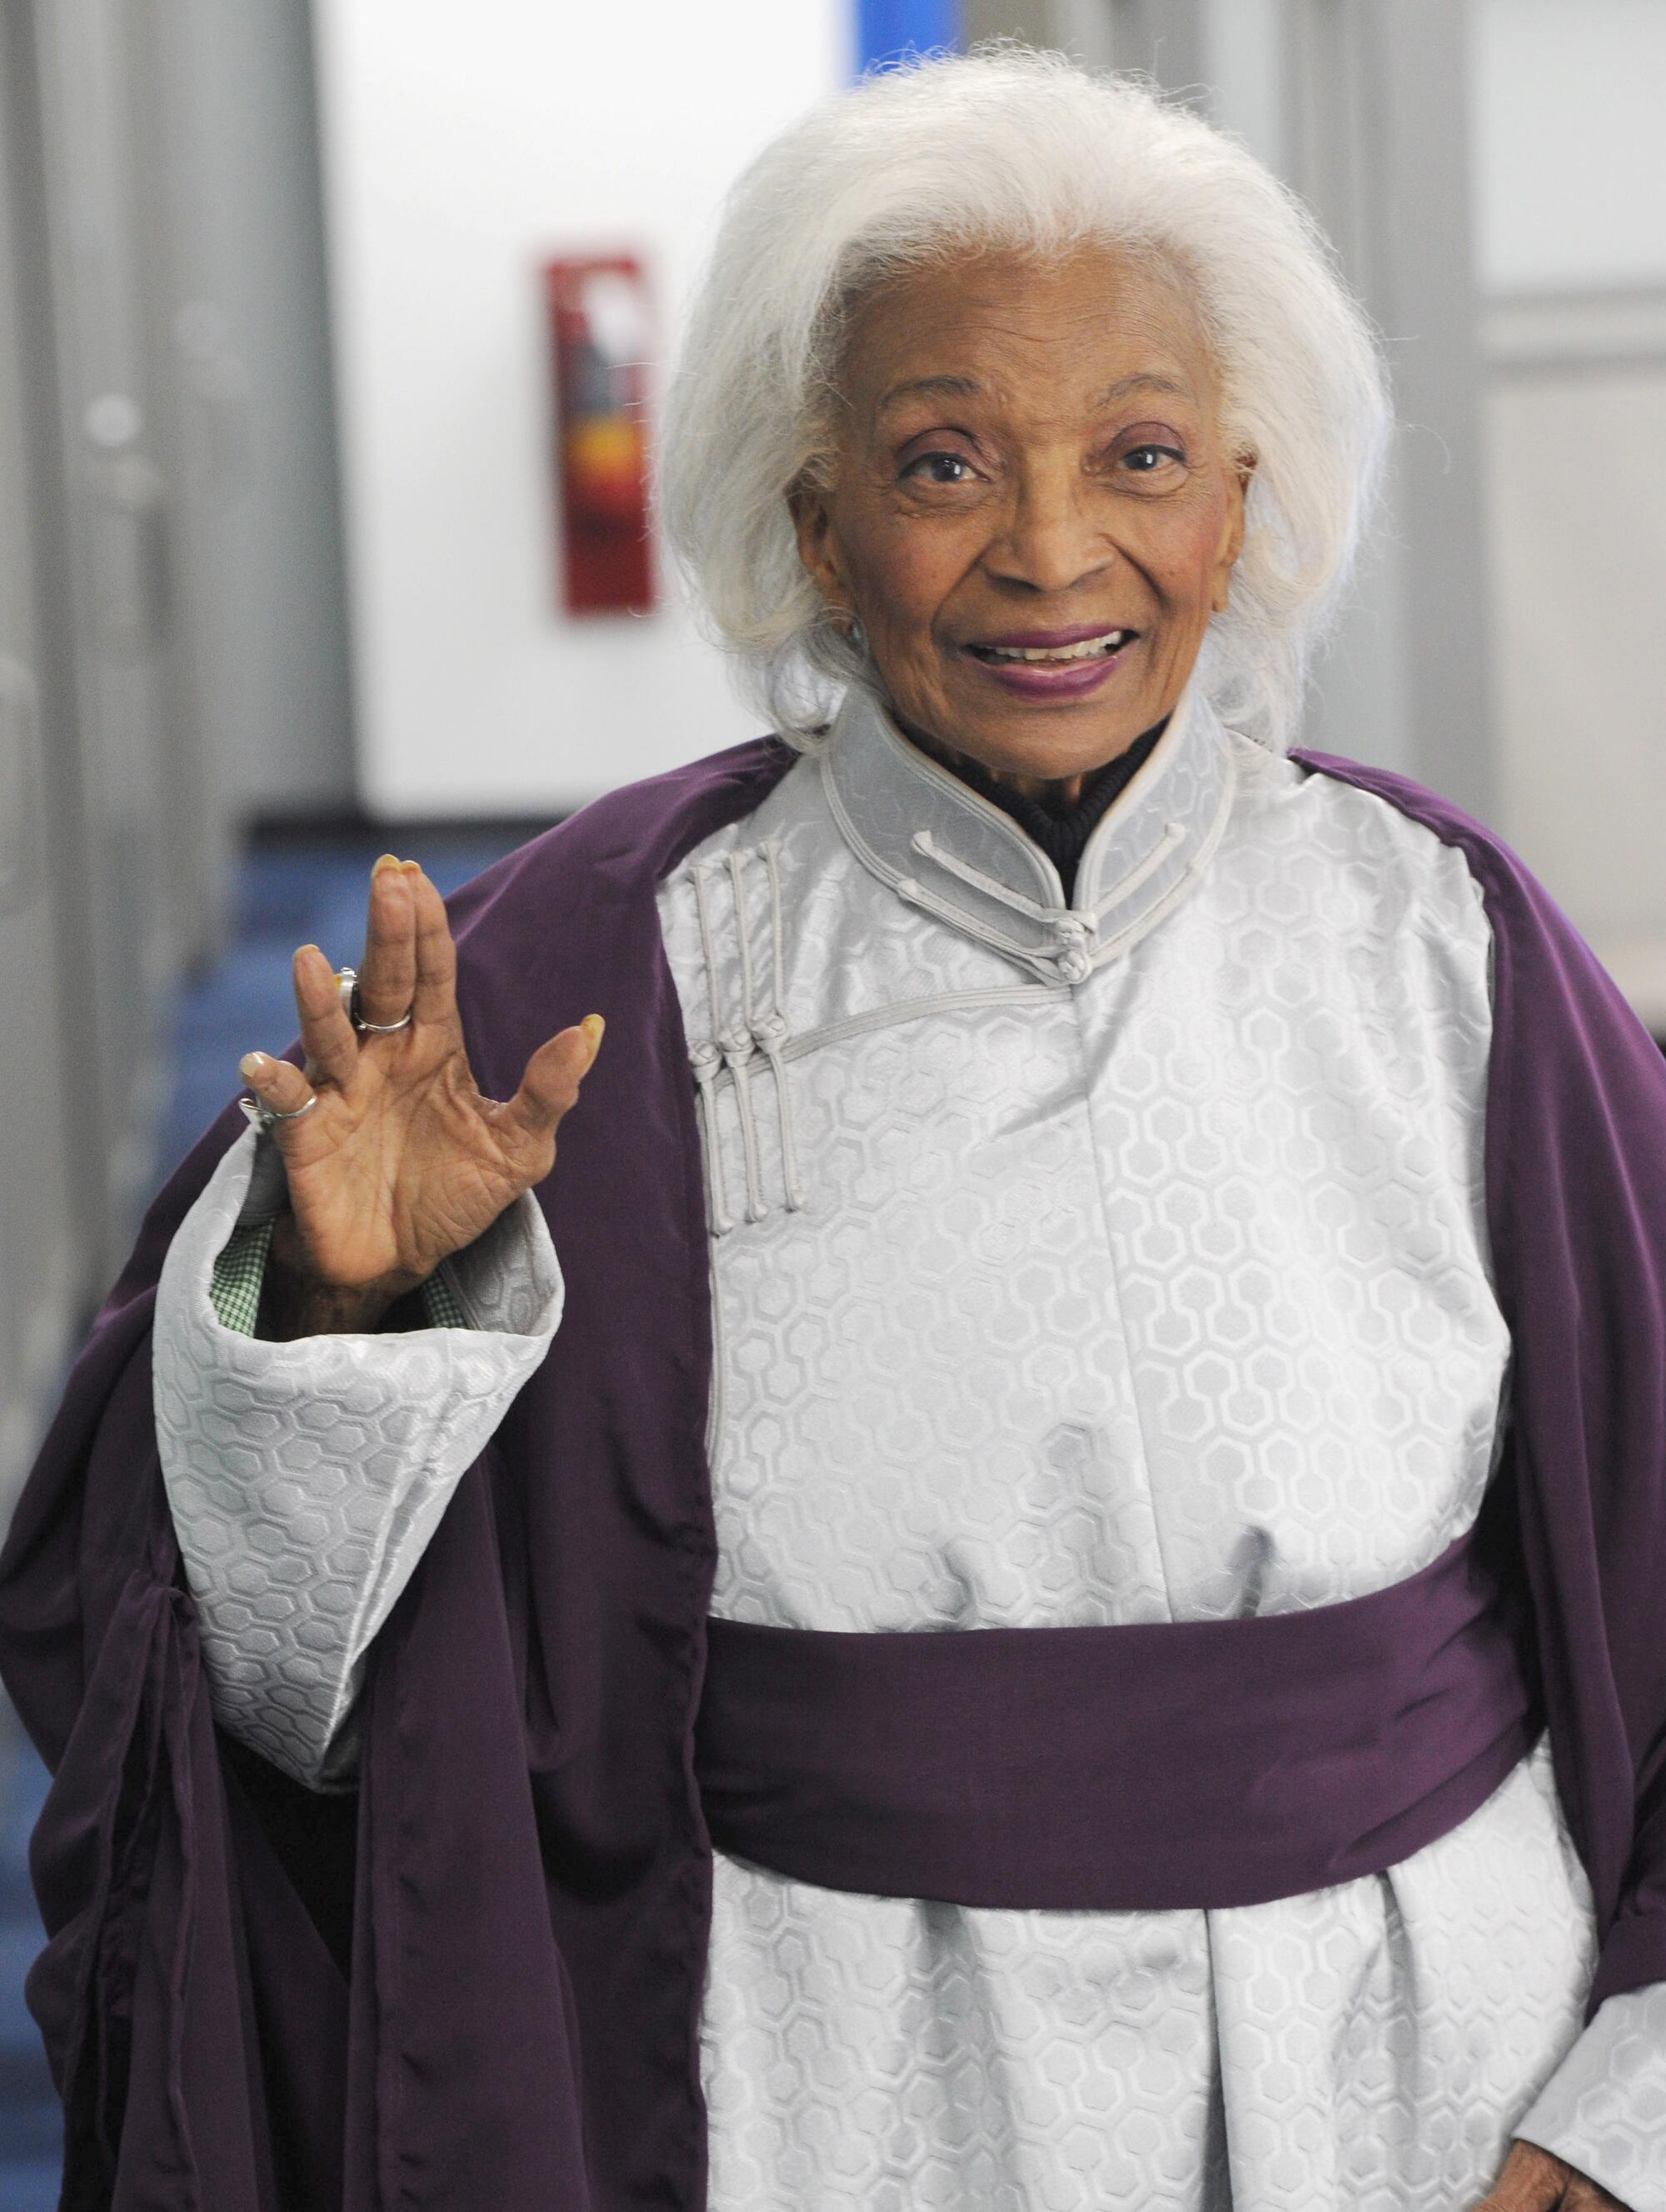 A woman with white hair smiles and spreads her fingers in a "Star Trek" symbol